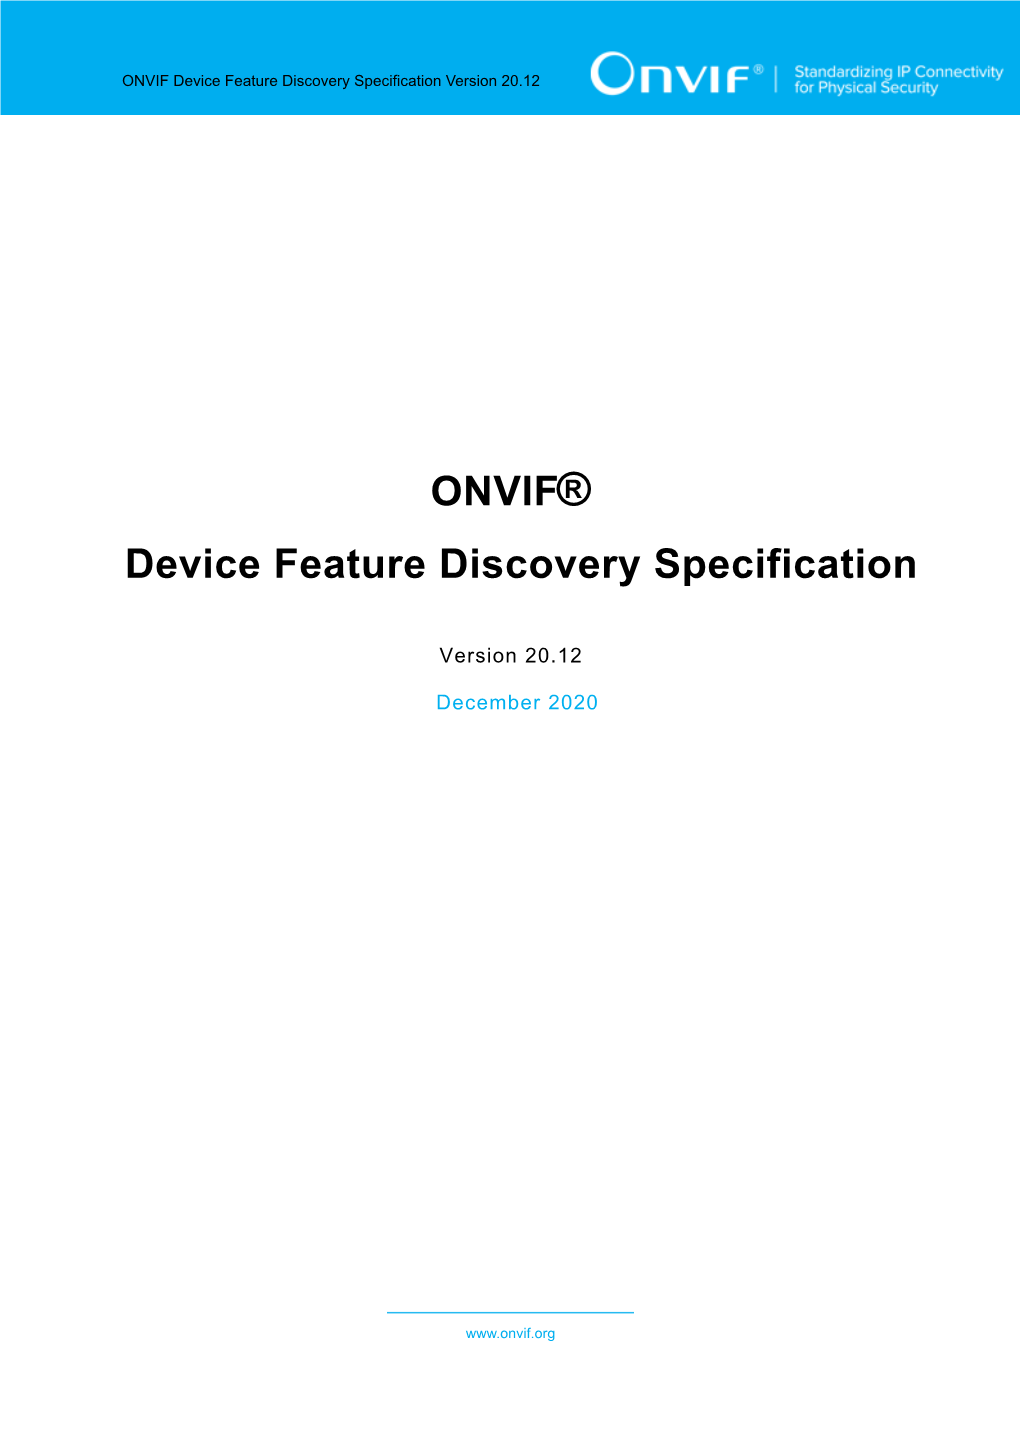 ONVIF® Device Feature Discovery Specification